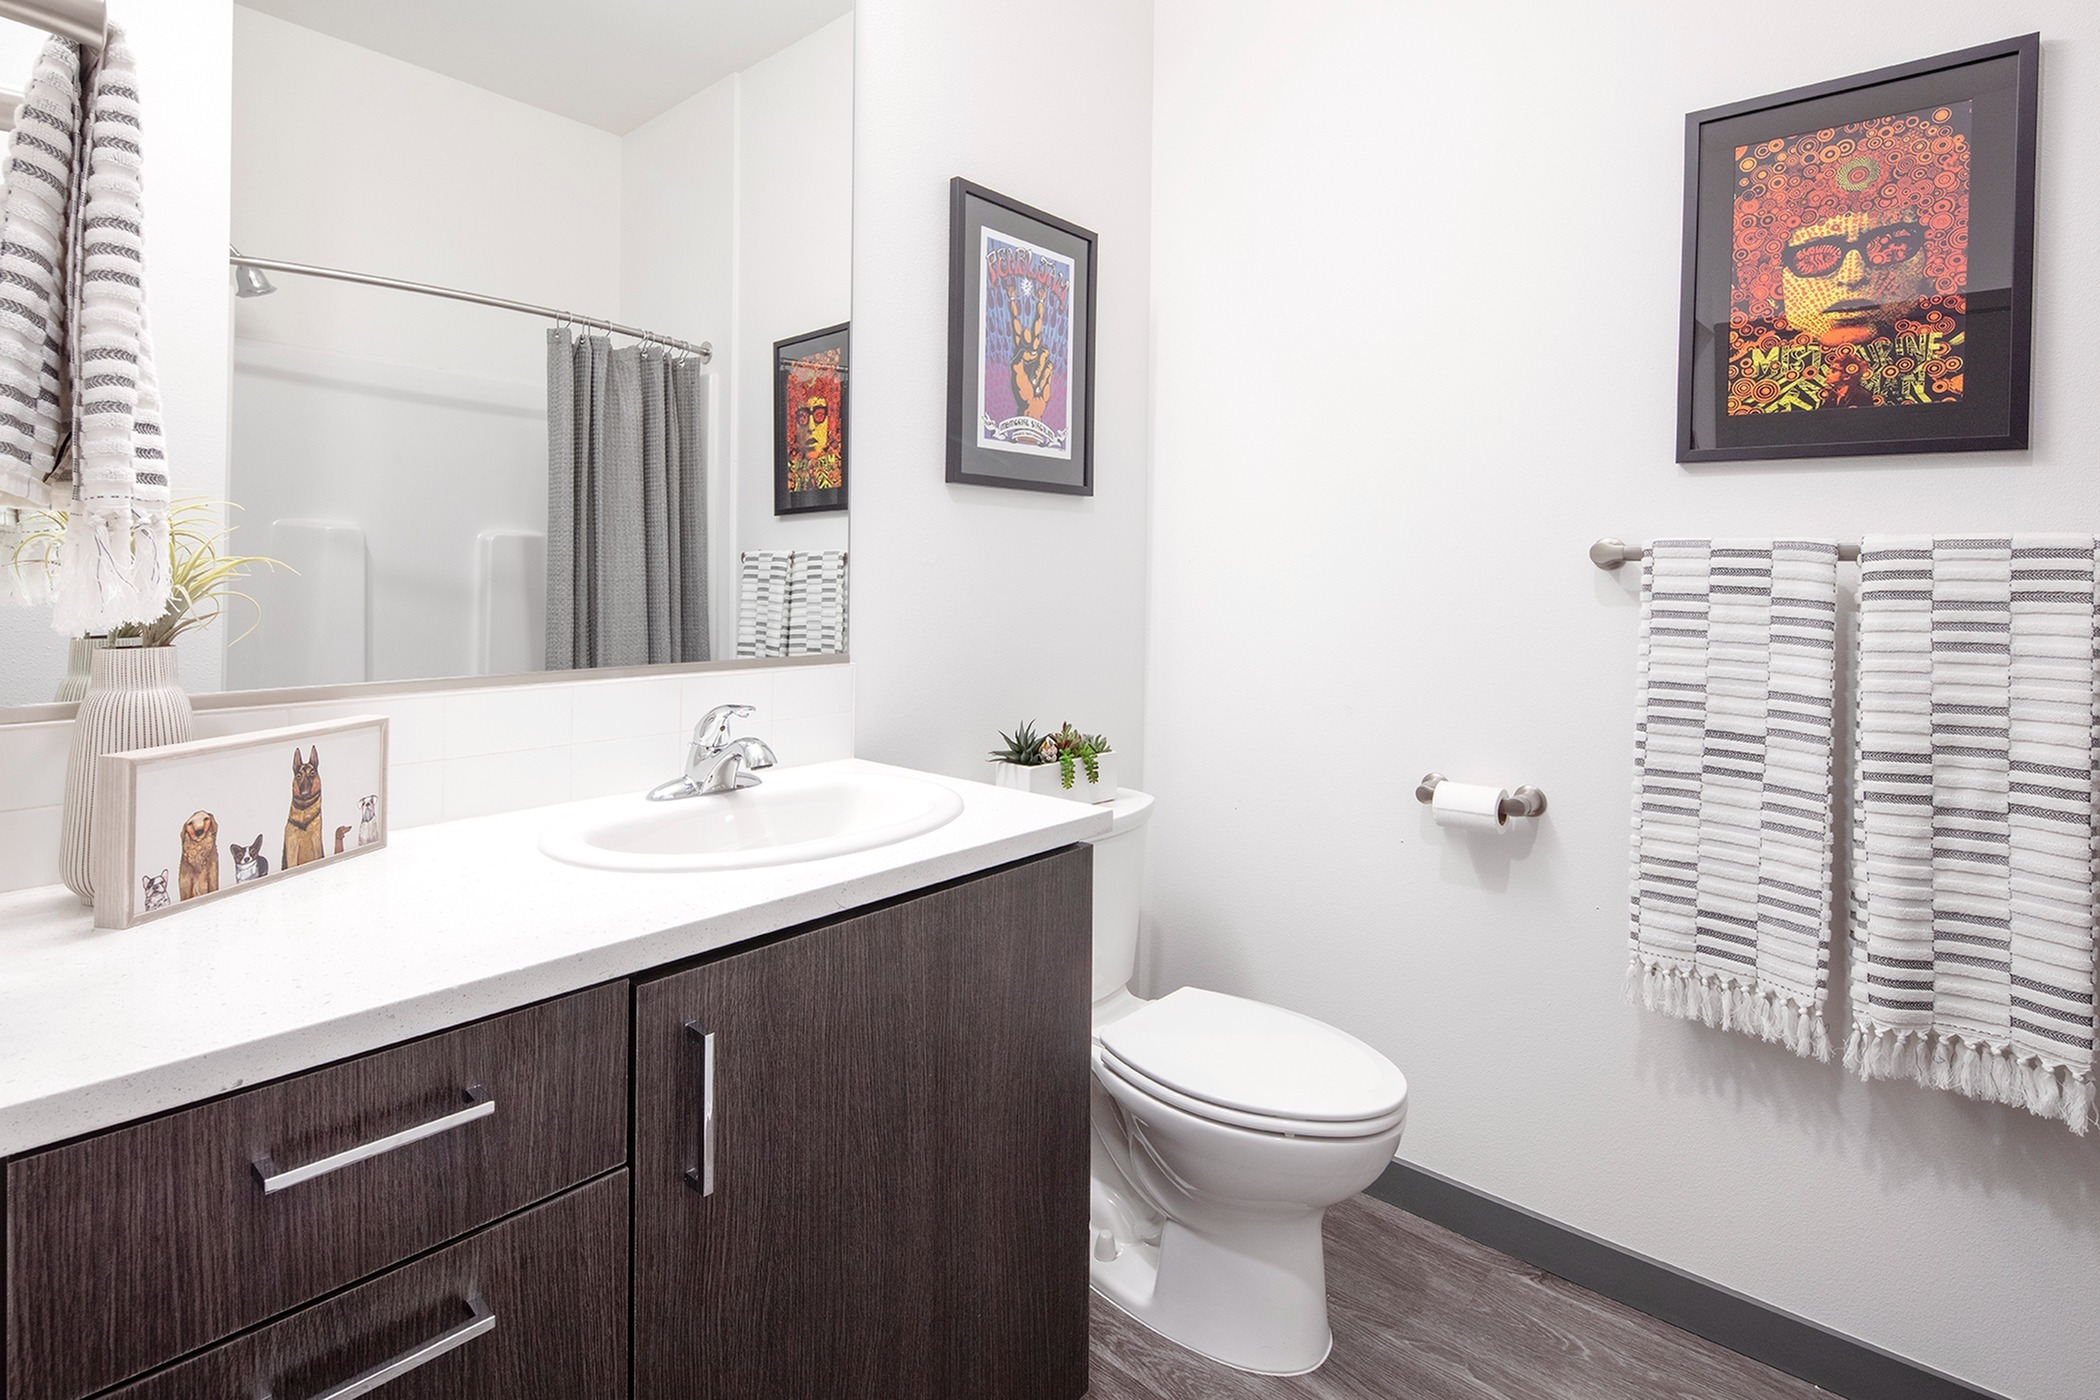 Apartments For Rent Williams District - Bathroom That Has Full Bath With Shower, Vinyl Wood Flooring, Large Mirror, And White Quartz Countertop.